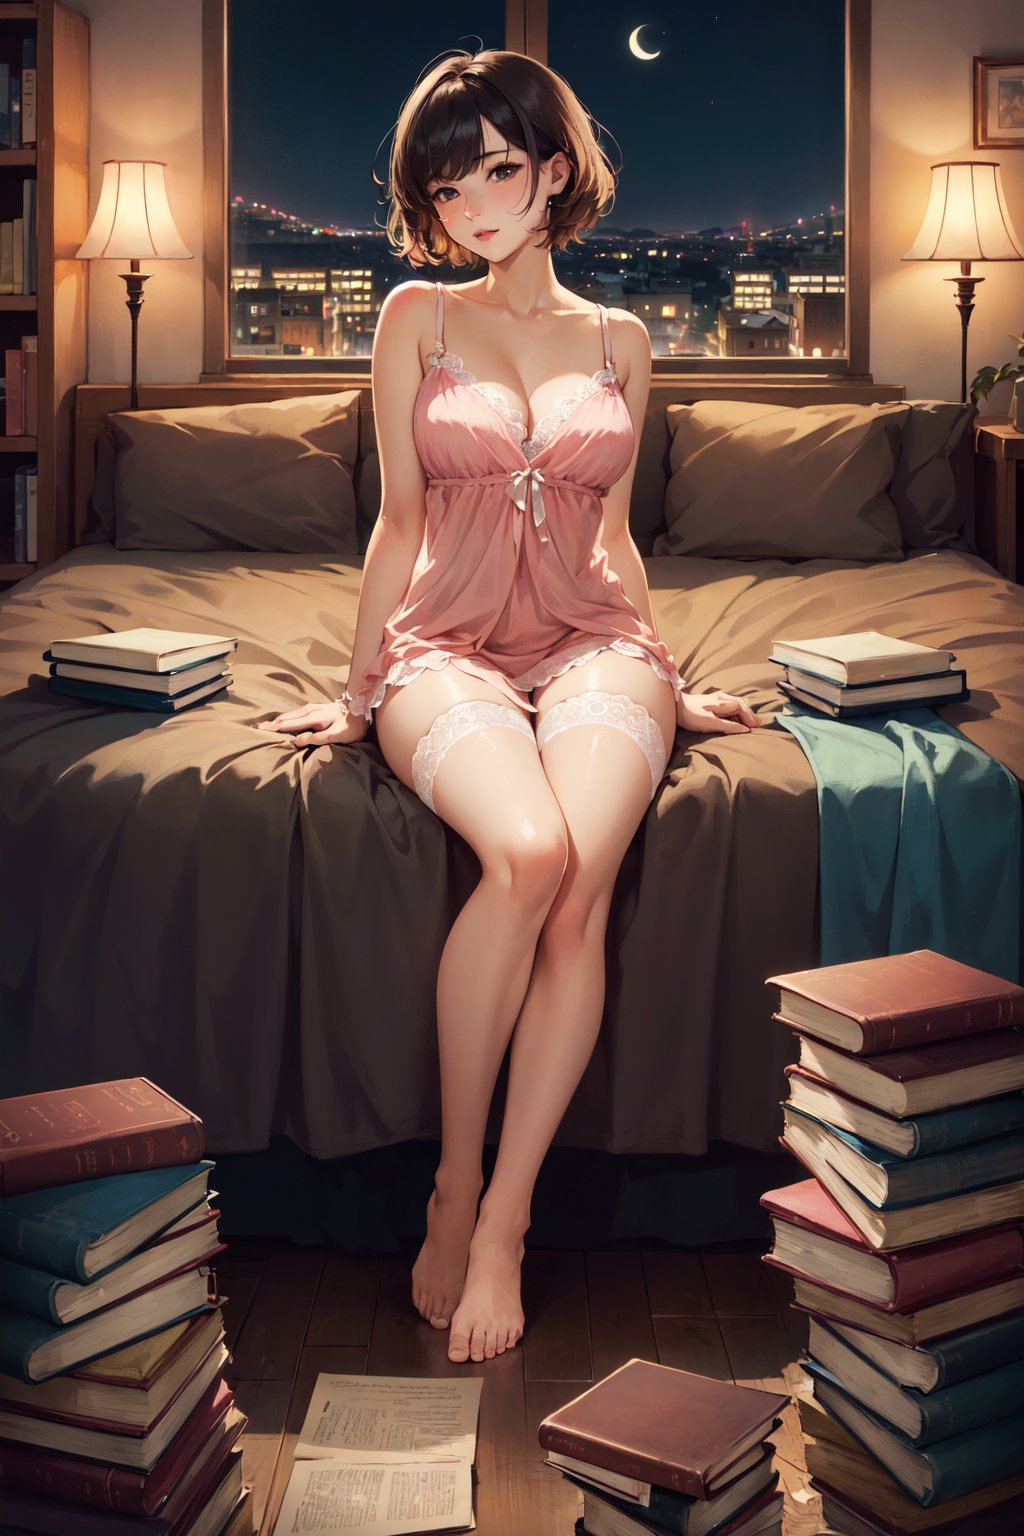 (masterpiece, best quality, hires, high resolution:1.2), (beautiful, aesthetic, perfect, delicate, intricate:1.2), (cute, adorable), (depth of field:1.2), (1girl, solo), (a sexy mature woman sitting on her bed), (sexy pink nightgown), (lace stockings), (colorful short hair), (natural breasts), (sitting:1.4), (stacks of books on the floor), (pile of books), (dark theme:1.4), (at night), (full body shot:1.4),